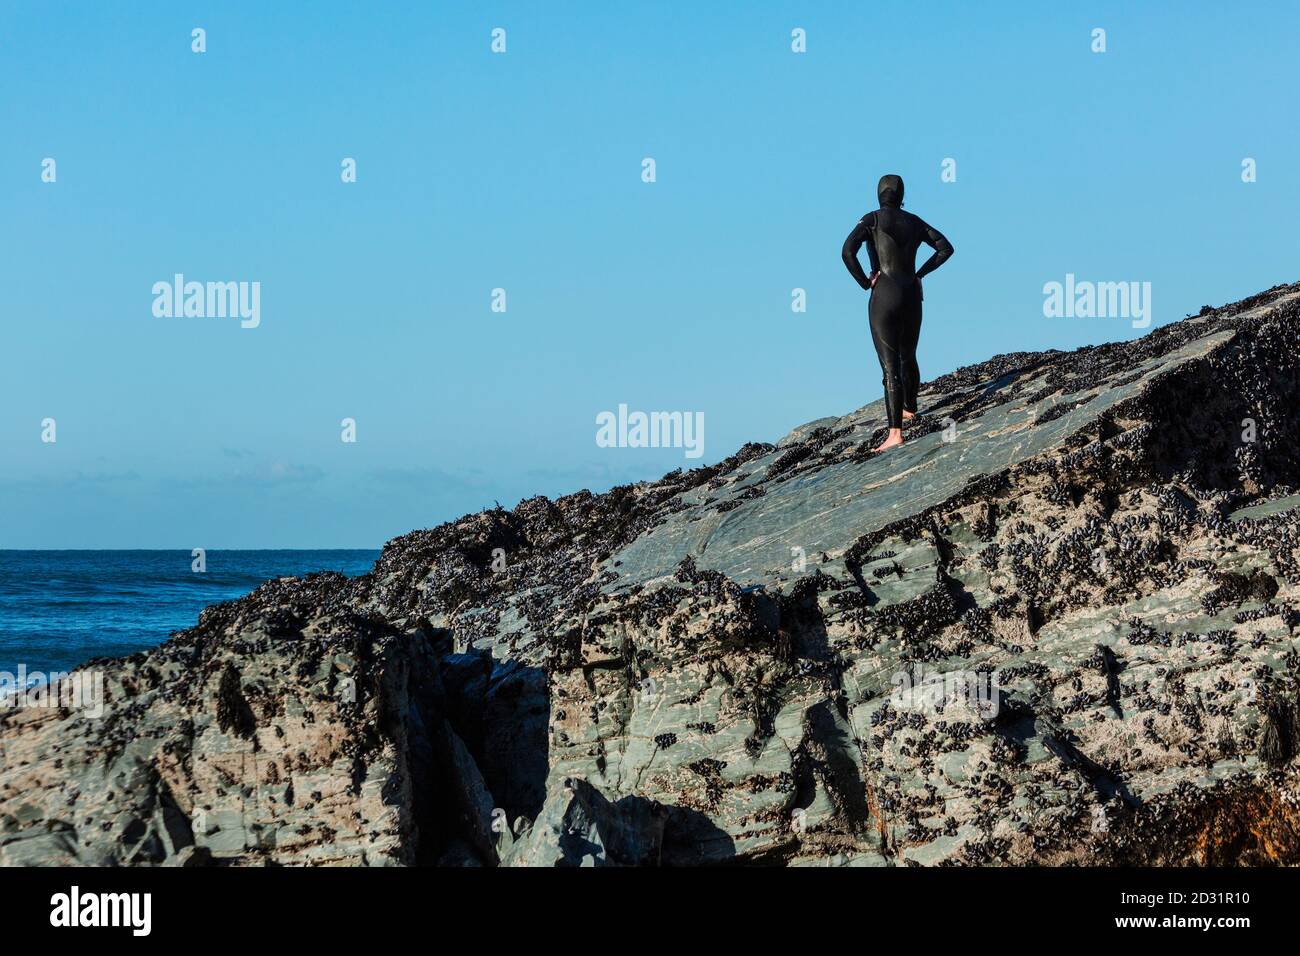 Woman in a wetsuit standing on rocks looking out to sea in Cornwall, UK Stock Photo